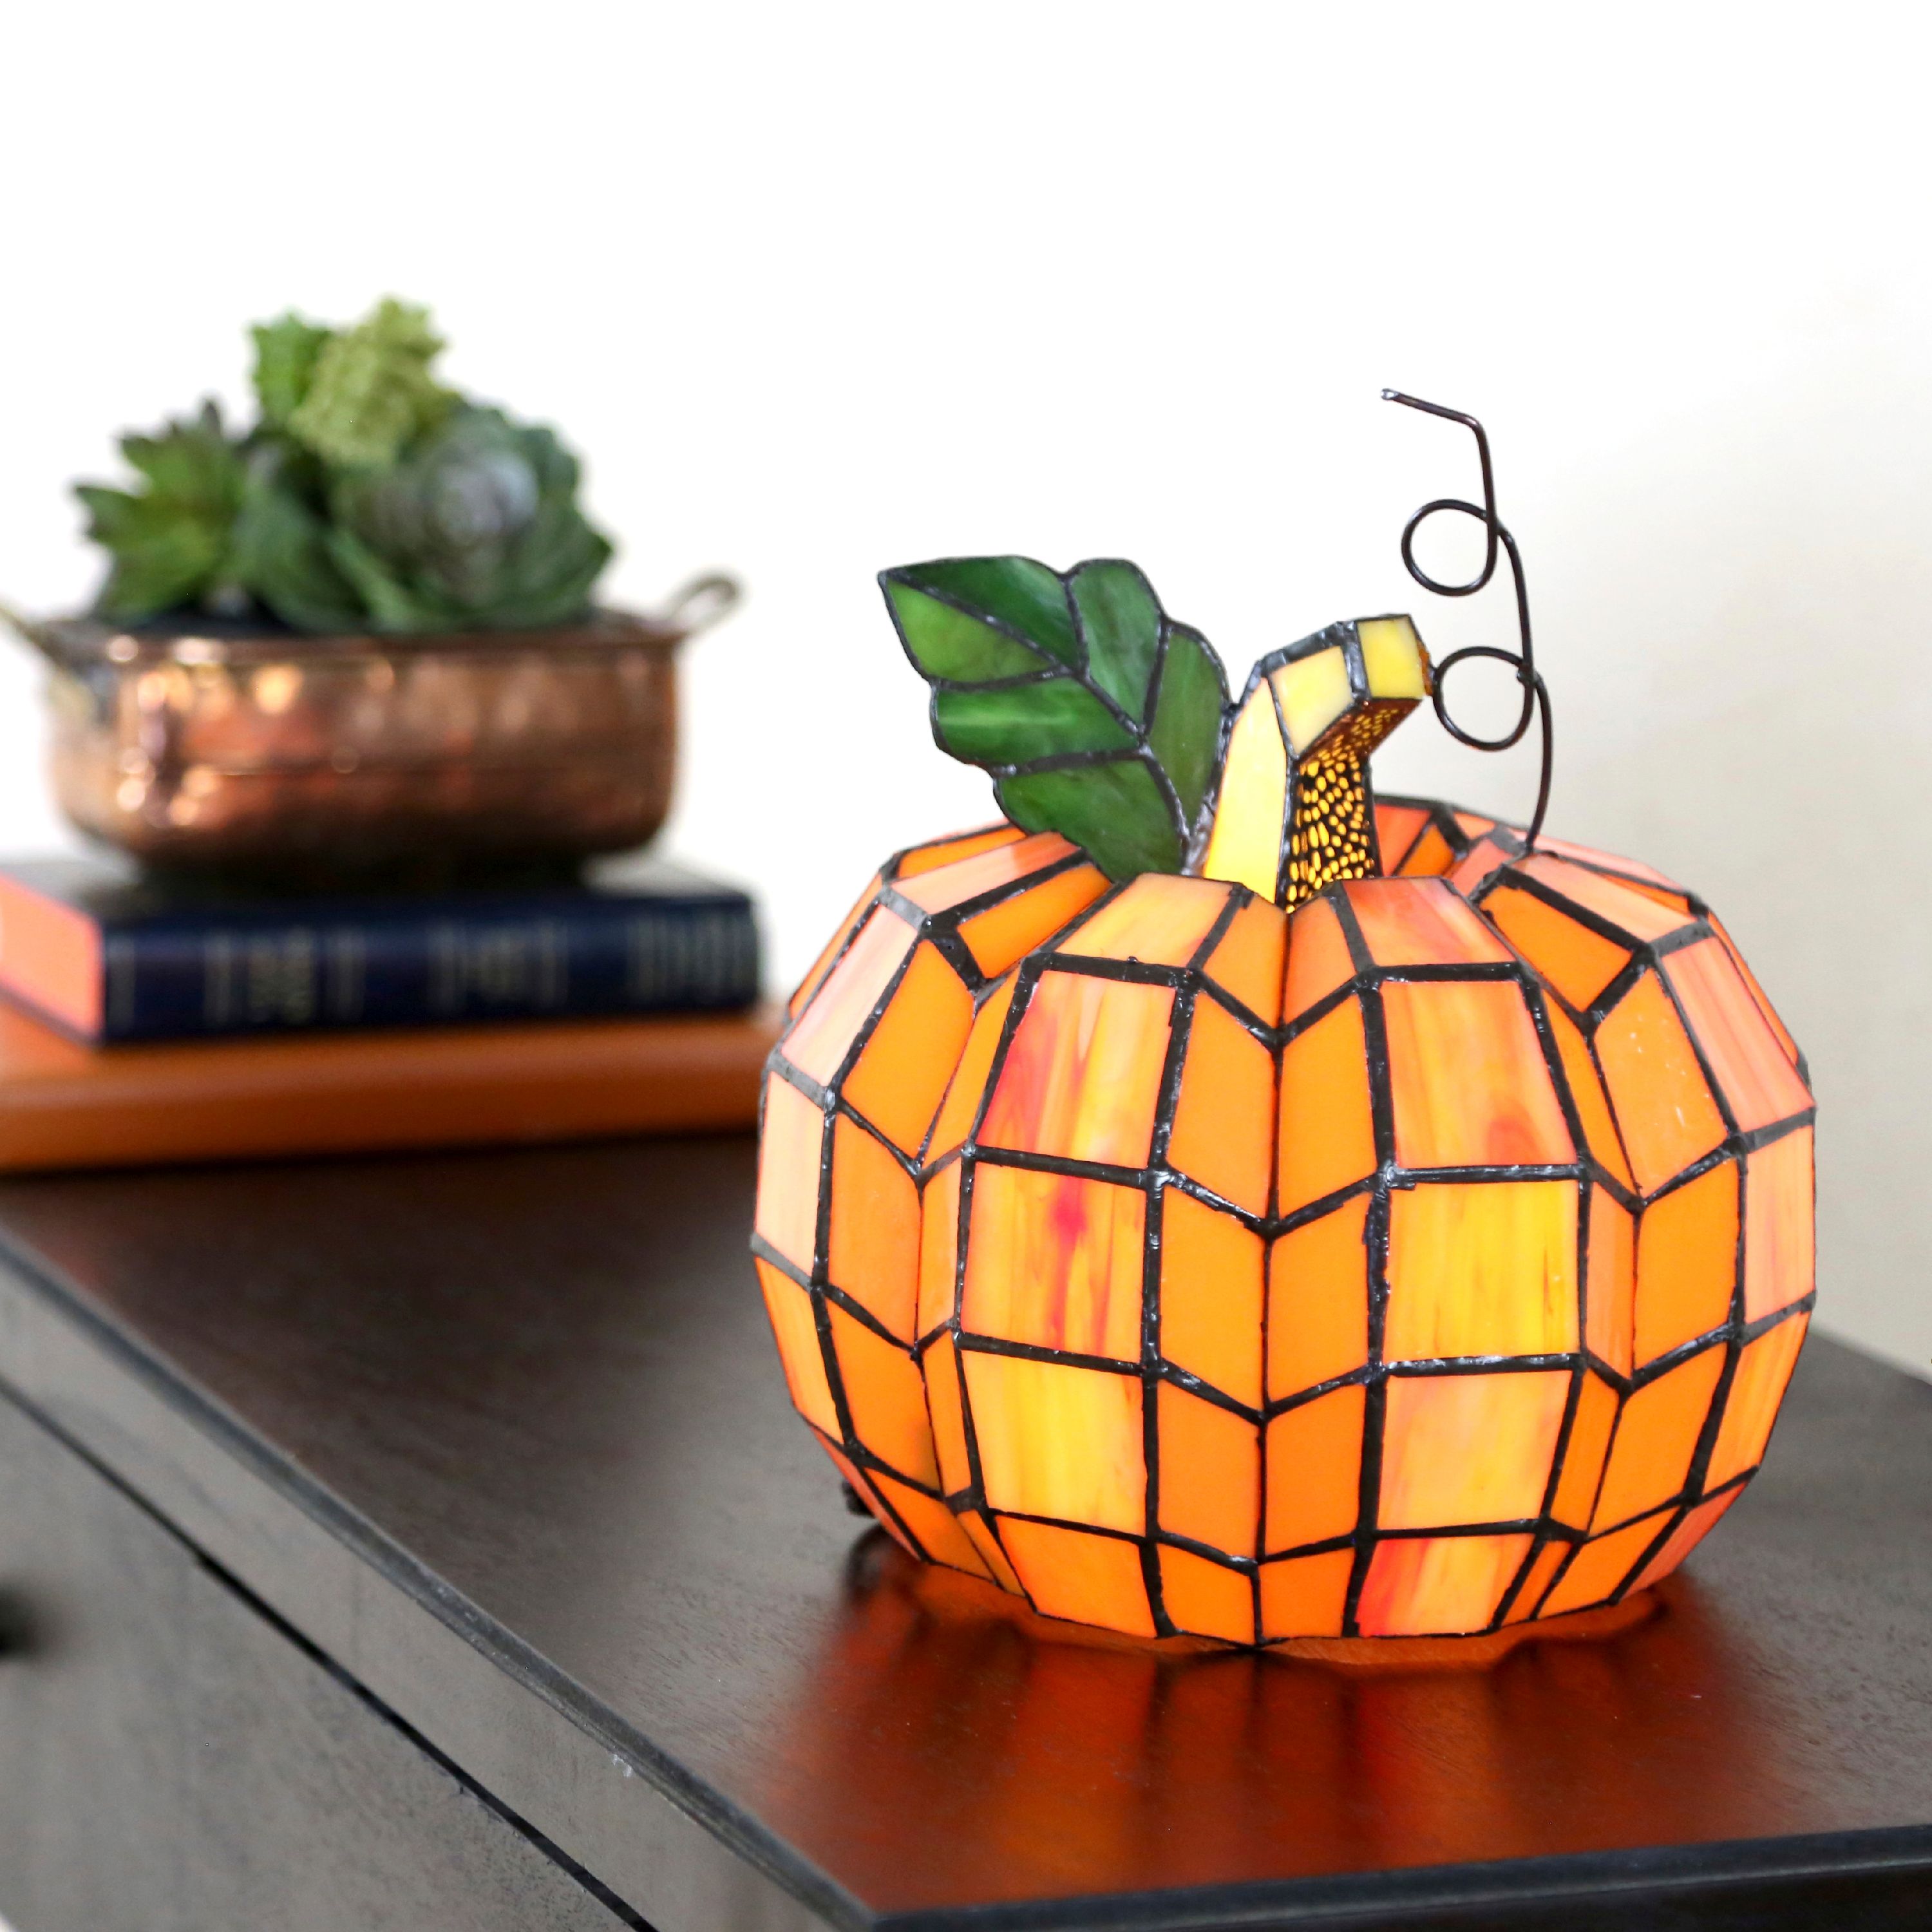 River of Goods Patch the Pumpkin Stained Glass Accent Lamp - image 2 of 7